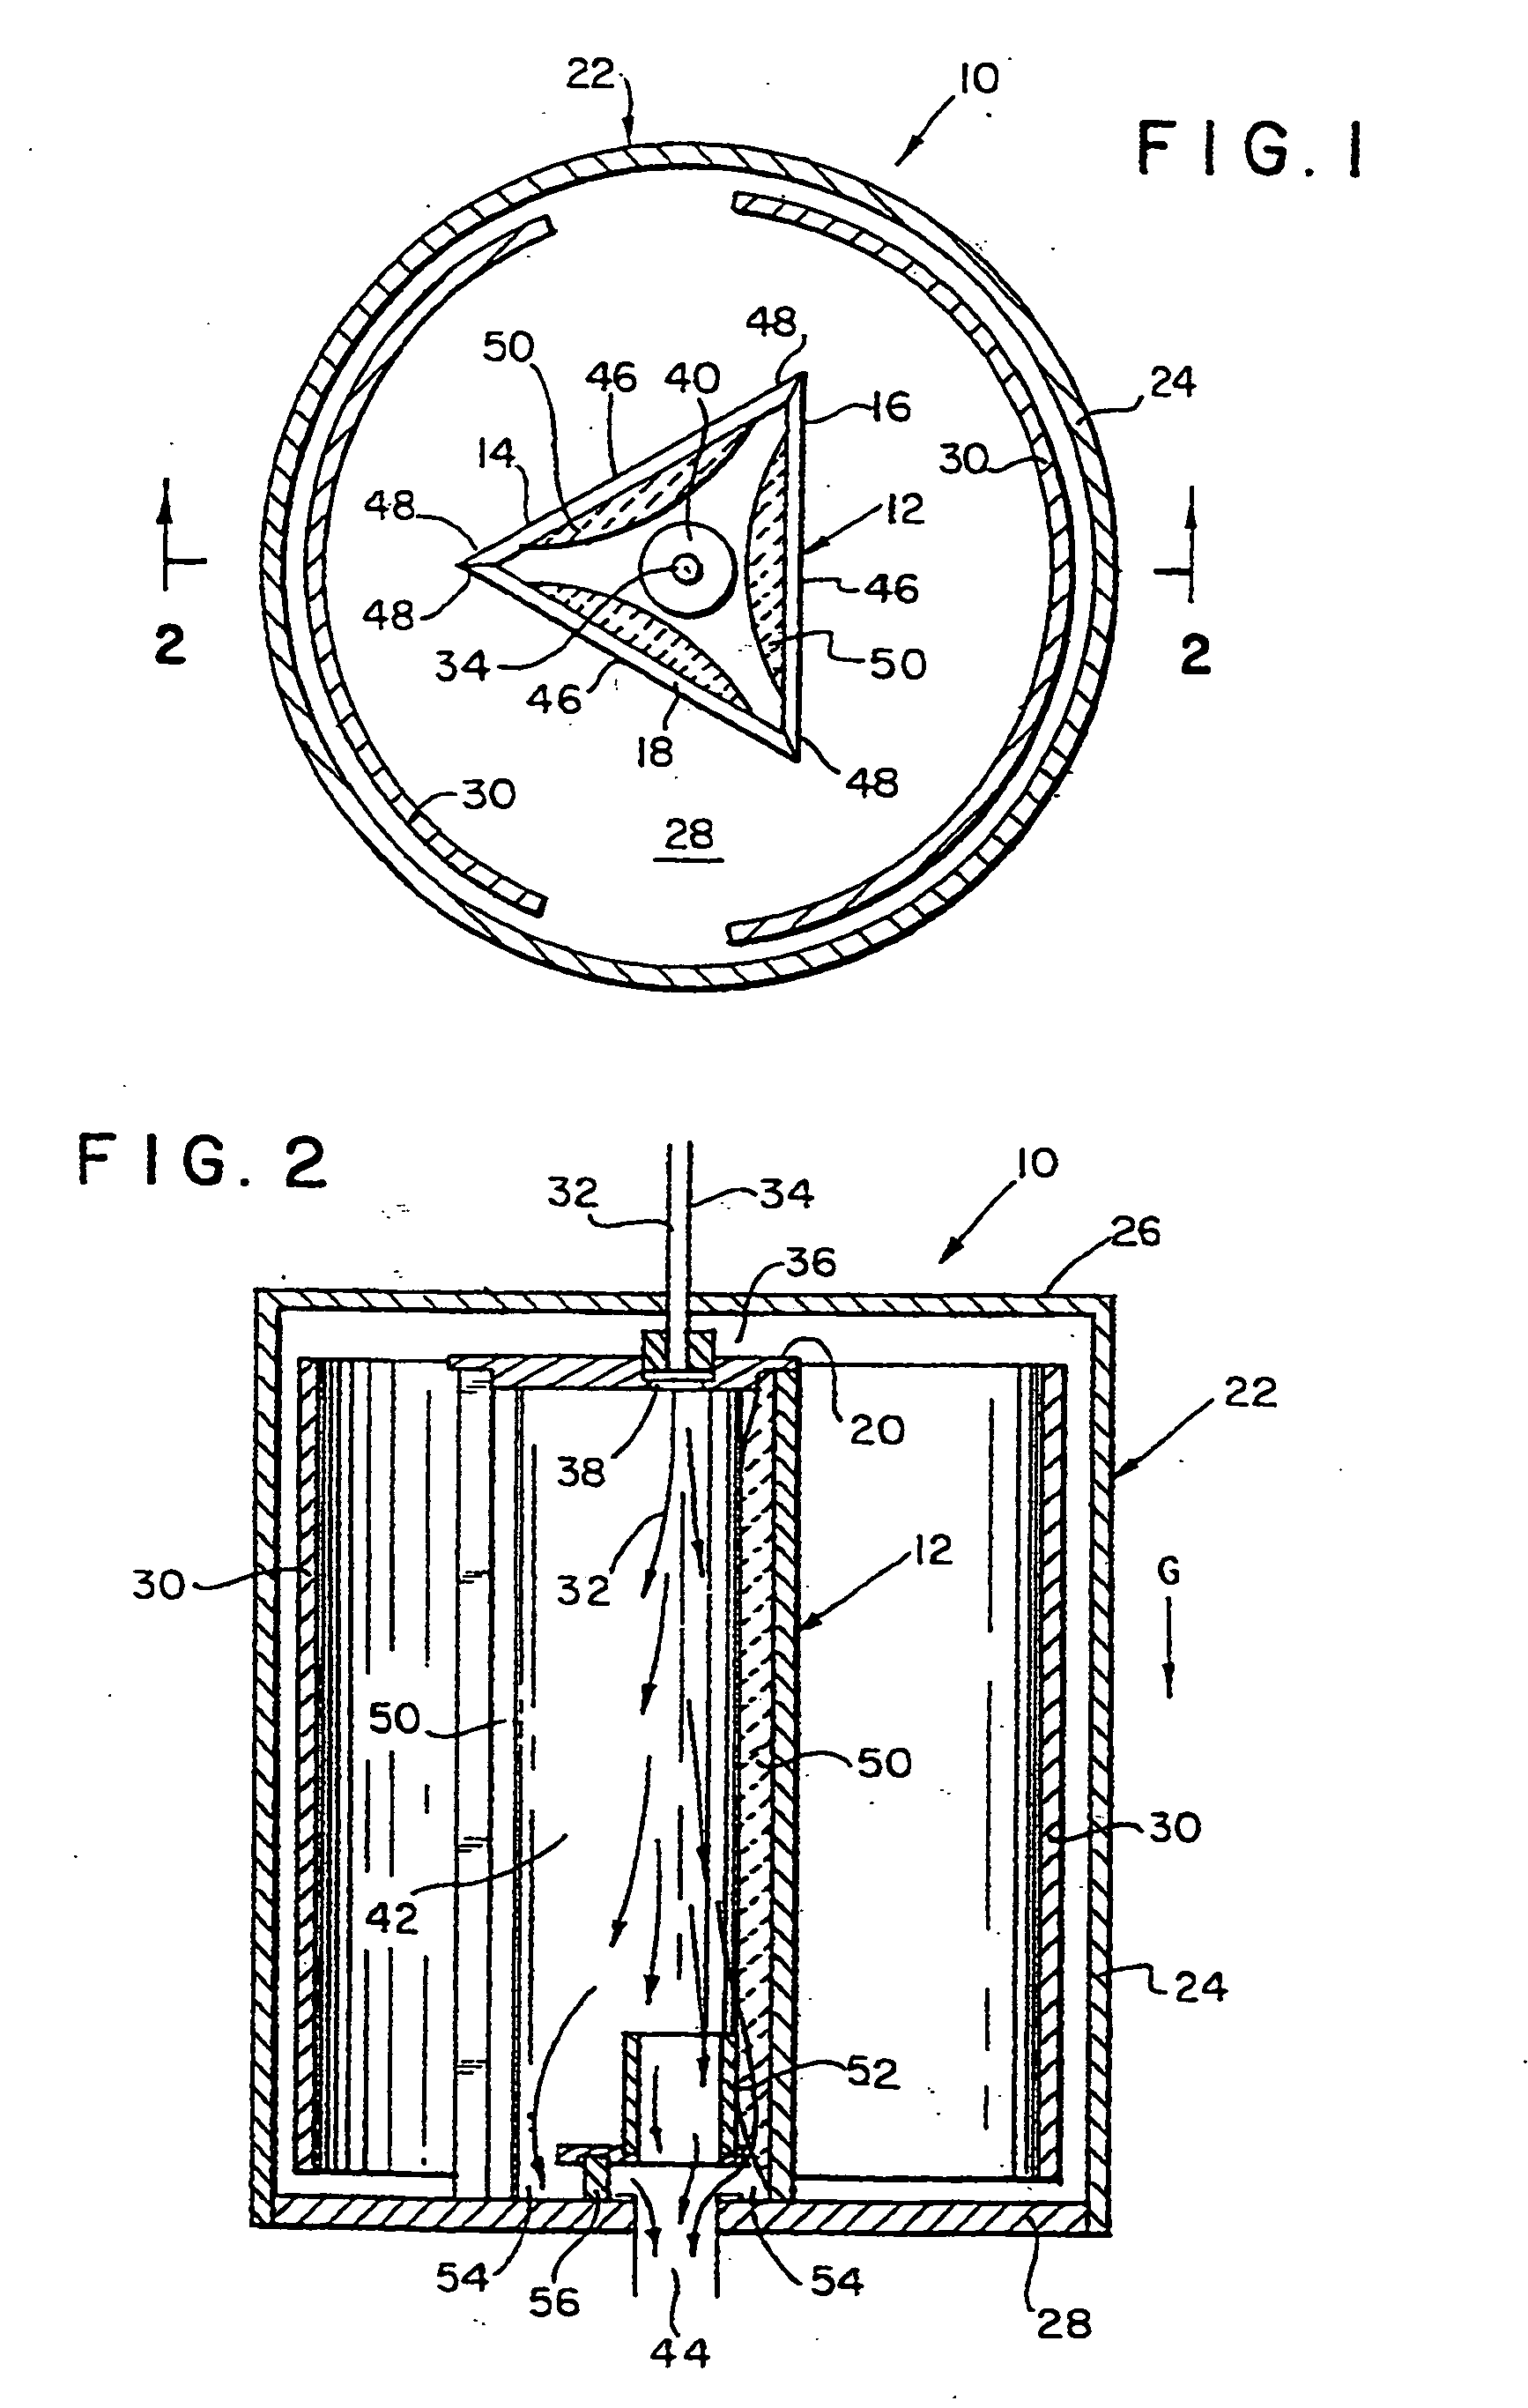 Silicon carbide with high thermal conductivity